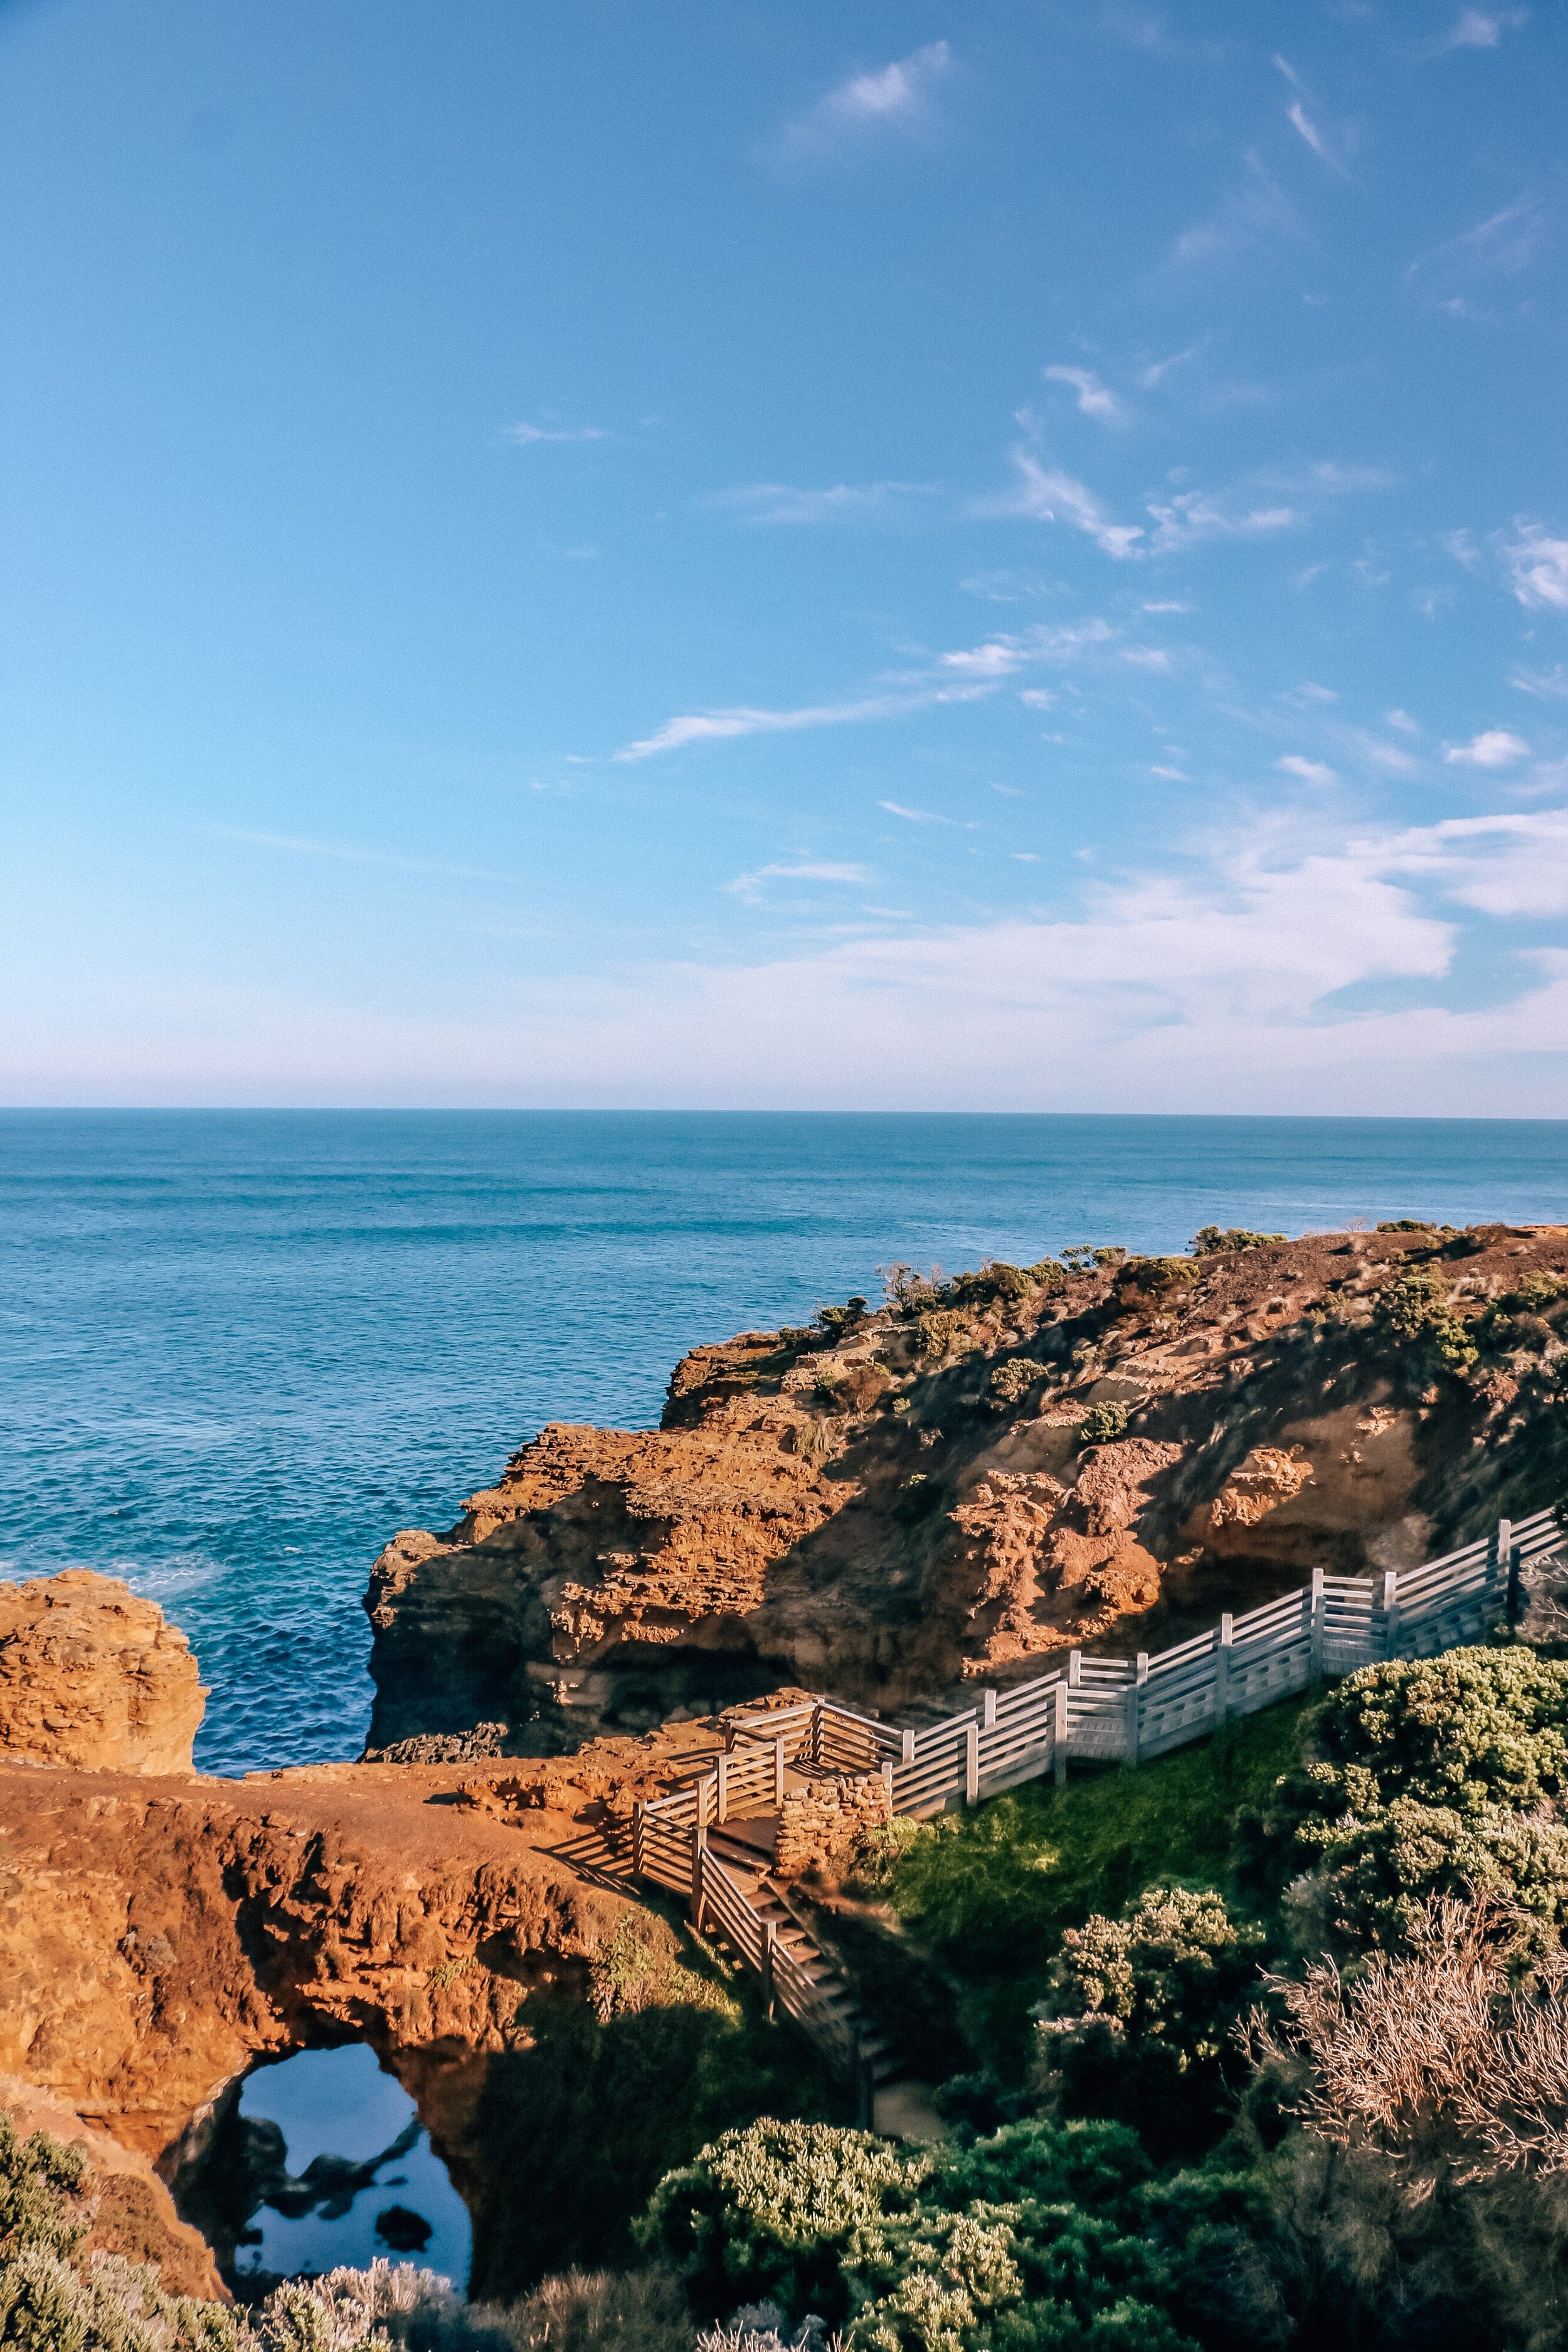 The Great Ocean Road is an iconic landmark in Australia but many people don’t bother to go further and visit one extra stop: The Grotto viewpoint on the Great Ocean Road. The Grotto is one of these underrated stops on the Great Ocean Road and this g…